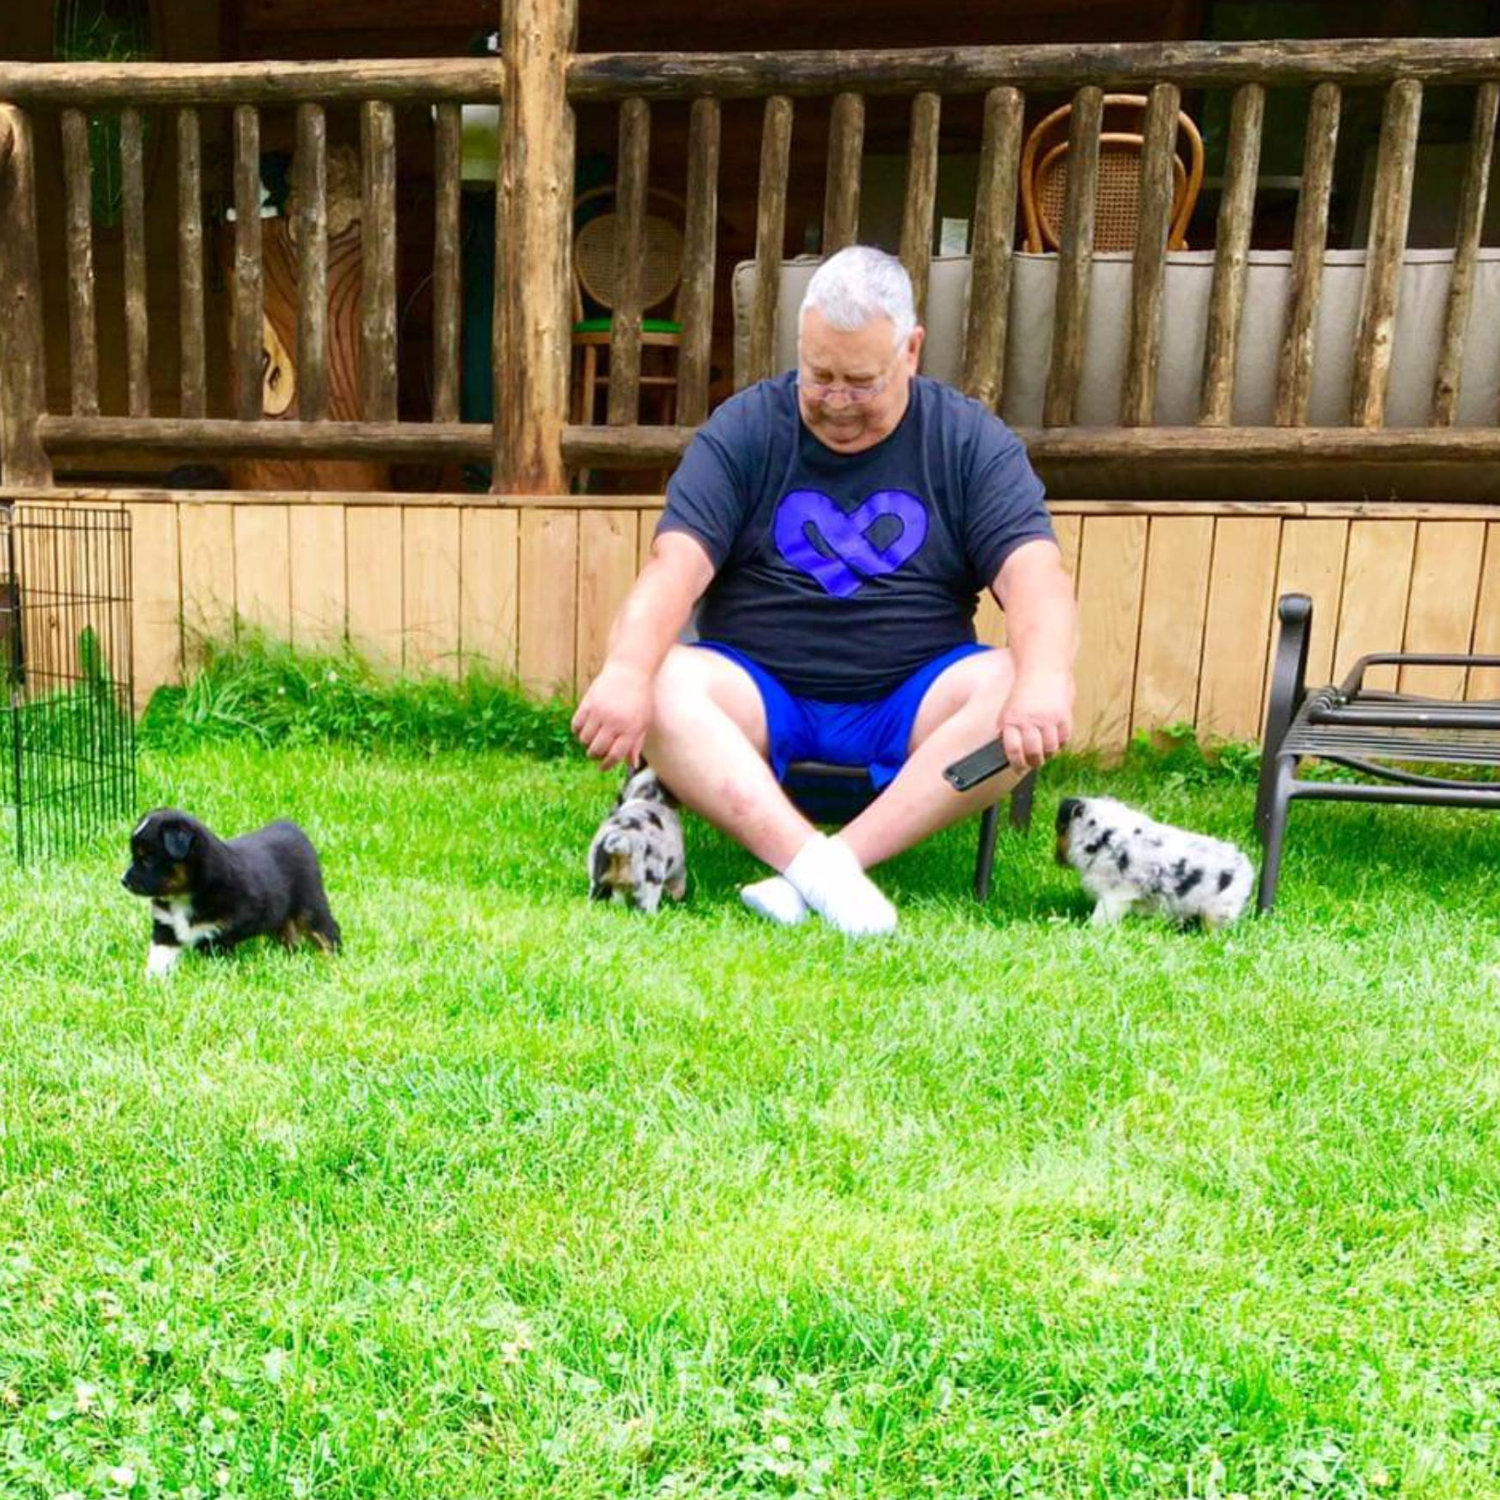 Dave Claus sitting in chair in grass with three puppies